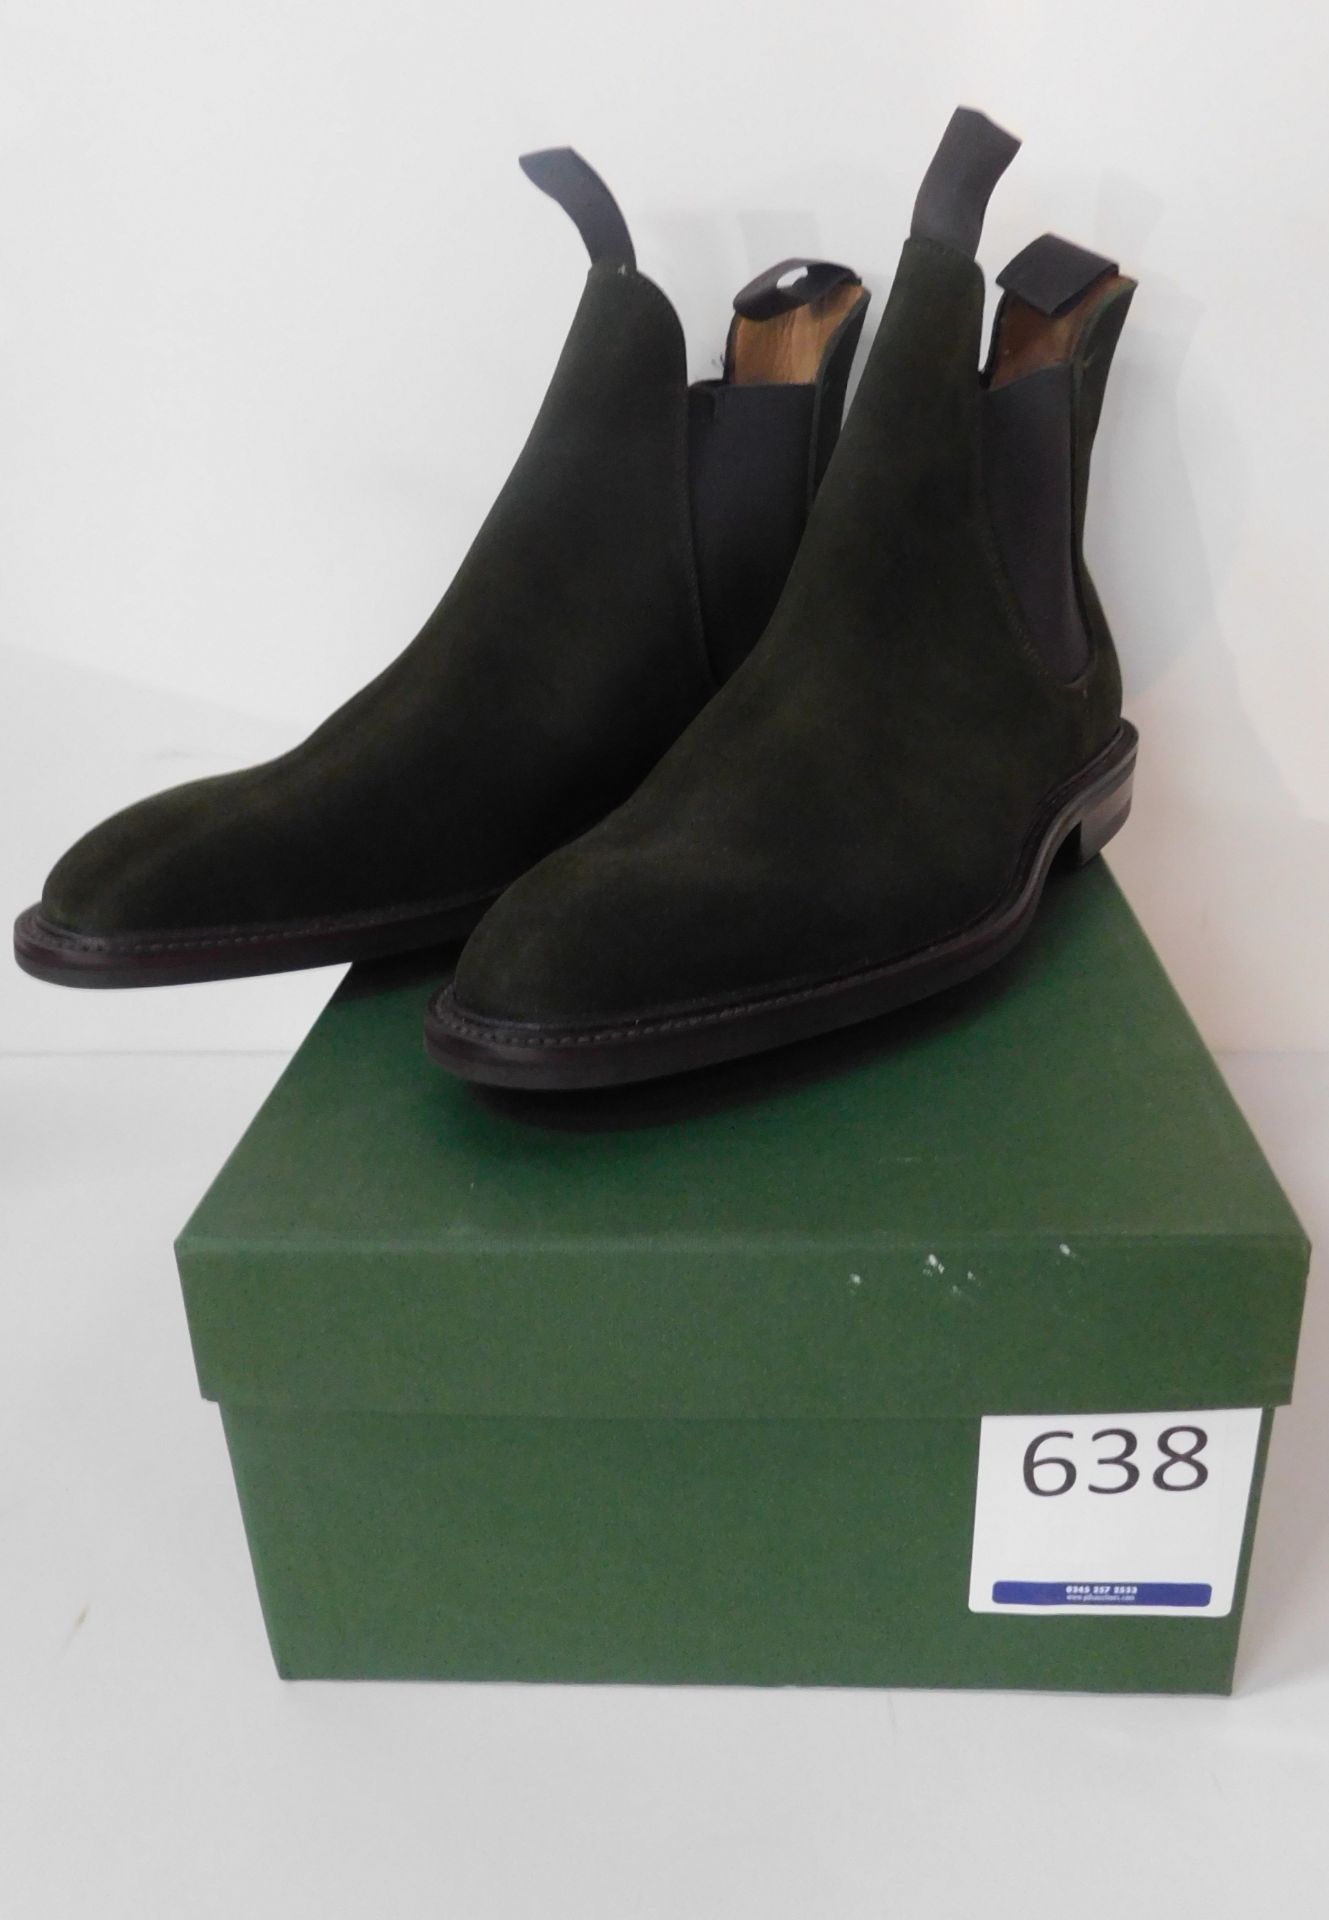 Sid Mashburn Green Gusset Boots Size 9.5 (Slight Seconds) (Location: Brentwood – See General Notes)